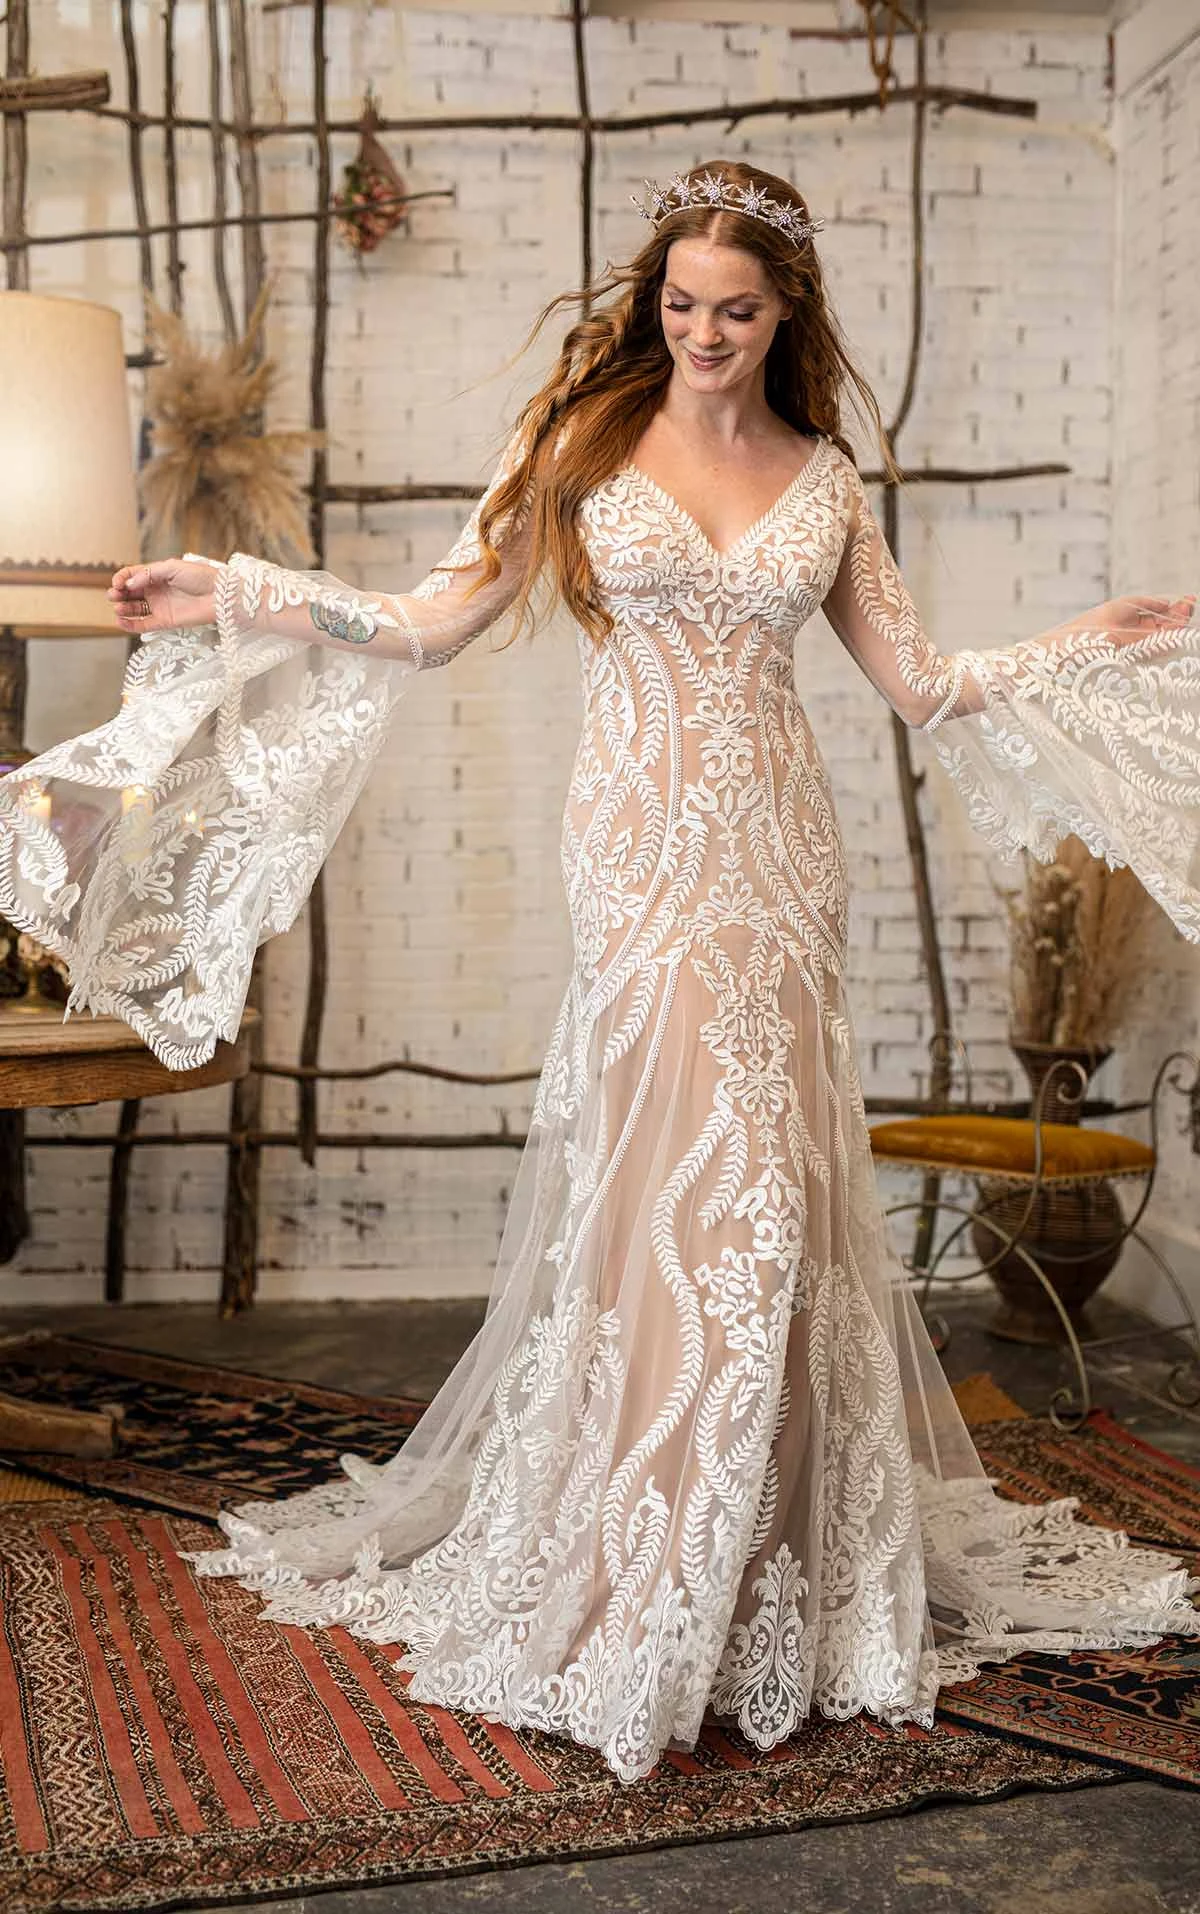 Gypsy Inspired Wedding Dress With Flared Bell Sleeves And